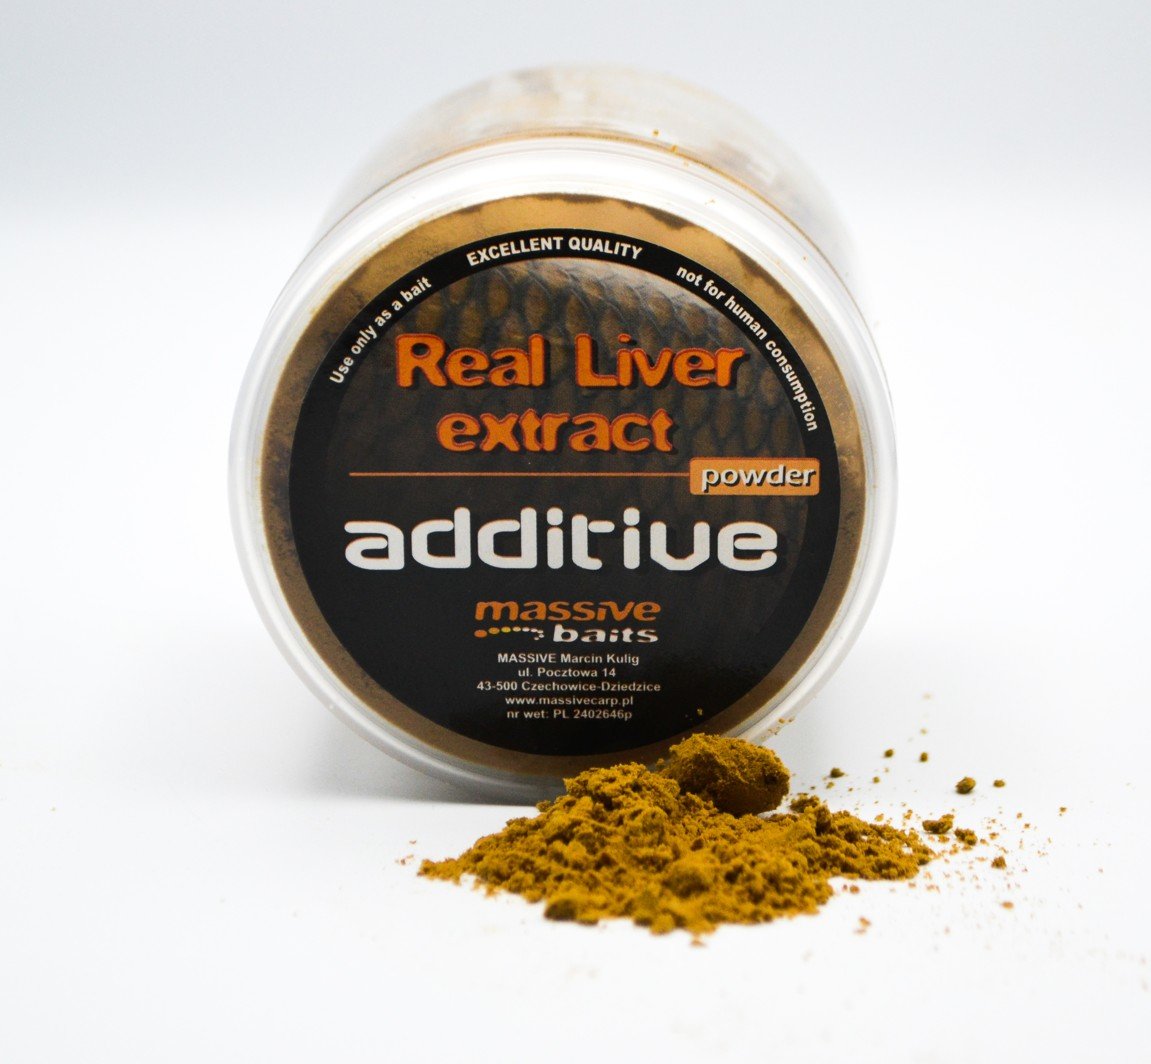 Massive Baits – Real Liver Extract Powder